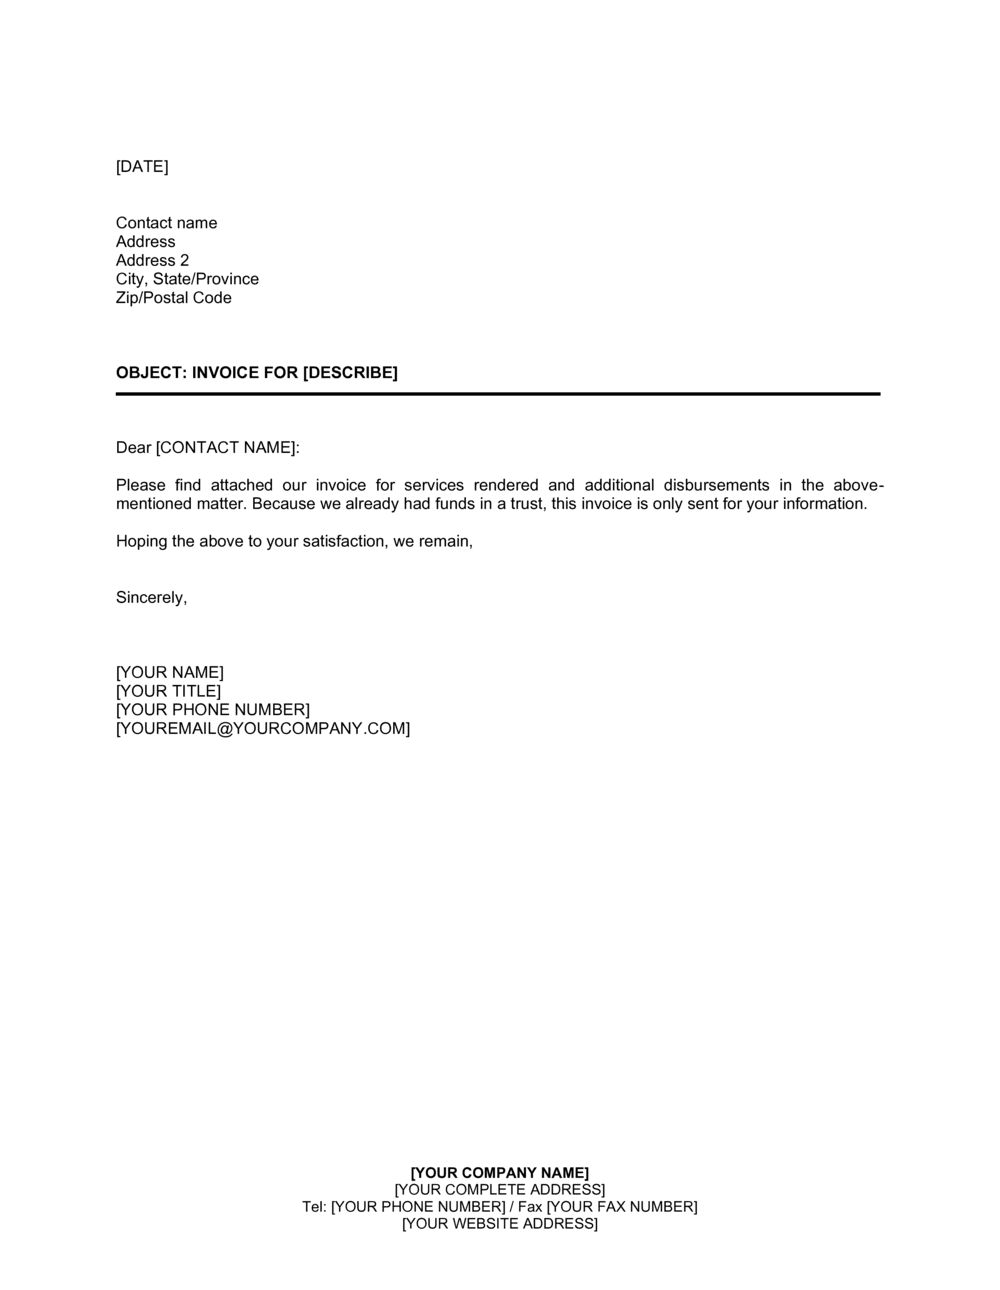 Letter to Customer Invoice Attached Template  by Business-in-a-Box™